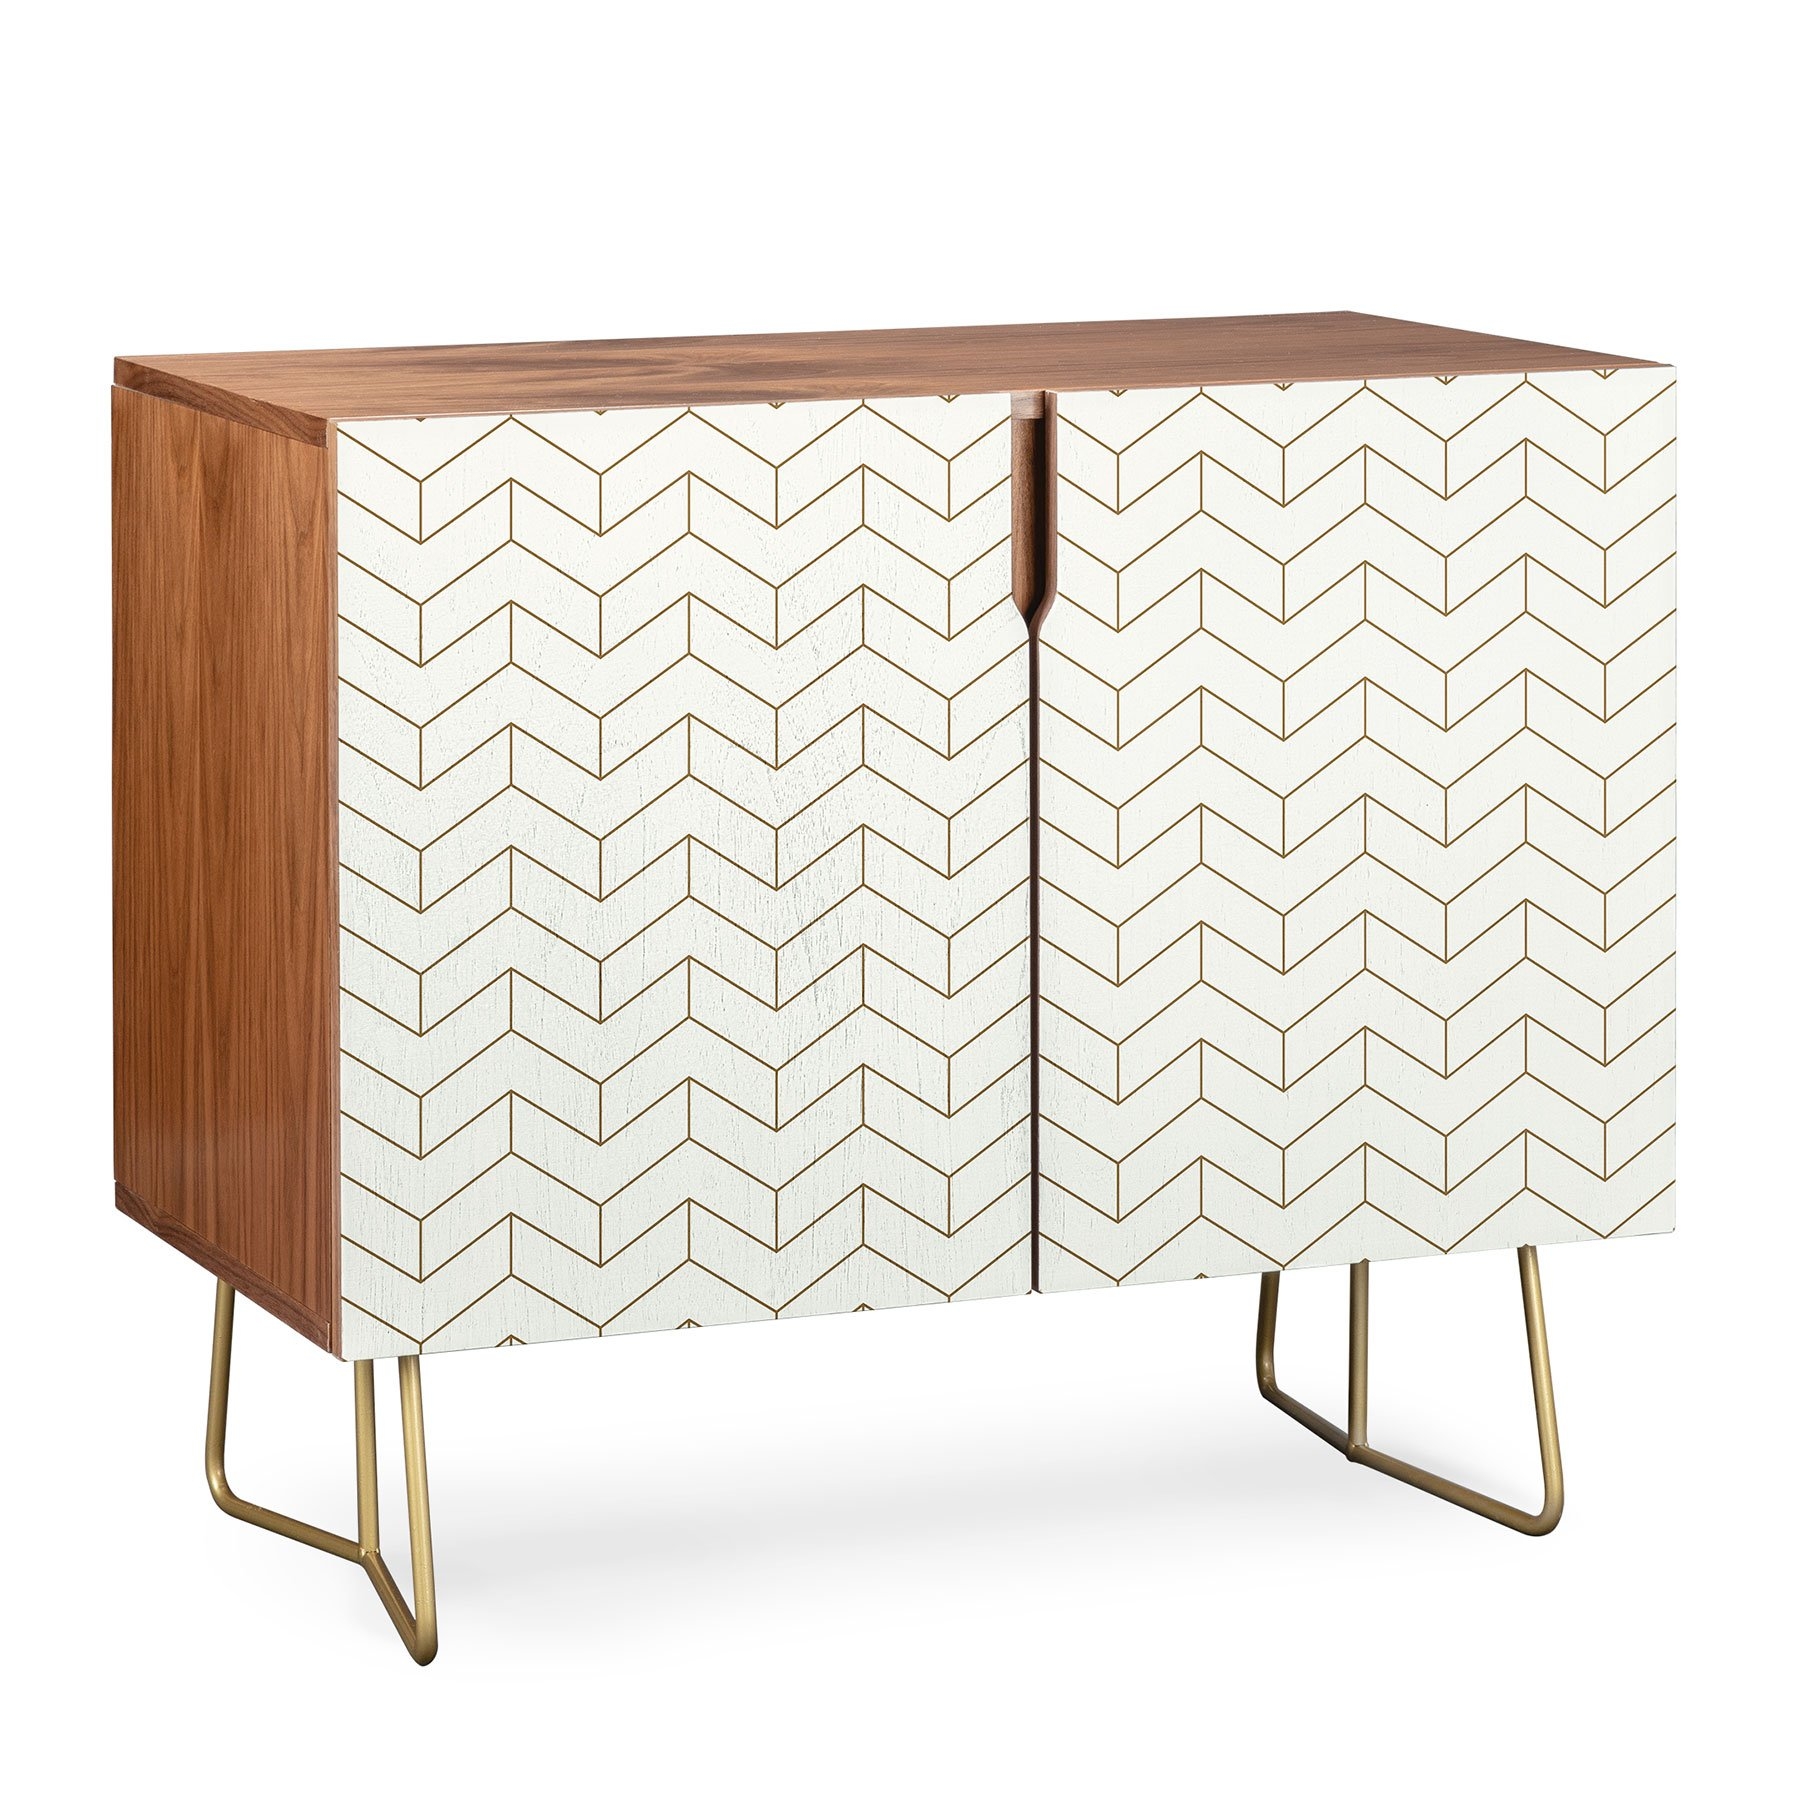 JUNE JOURNAL SIMPLE LINEAR GEOMETRY CREAM CREDENZA - Image 0